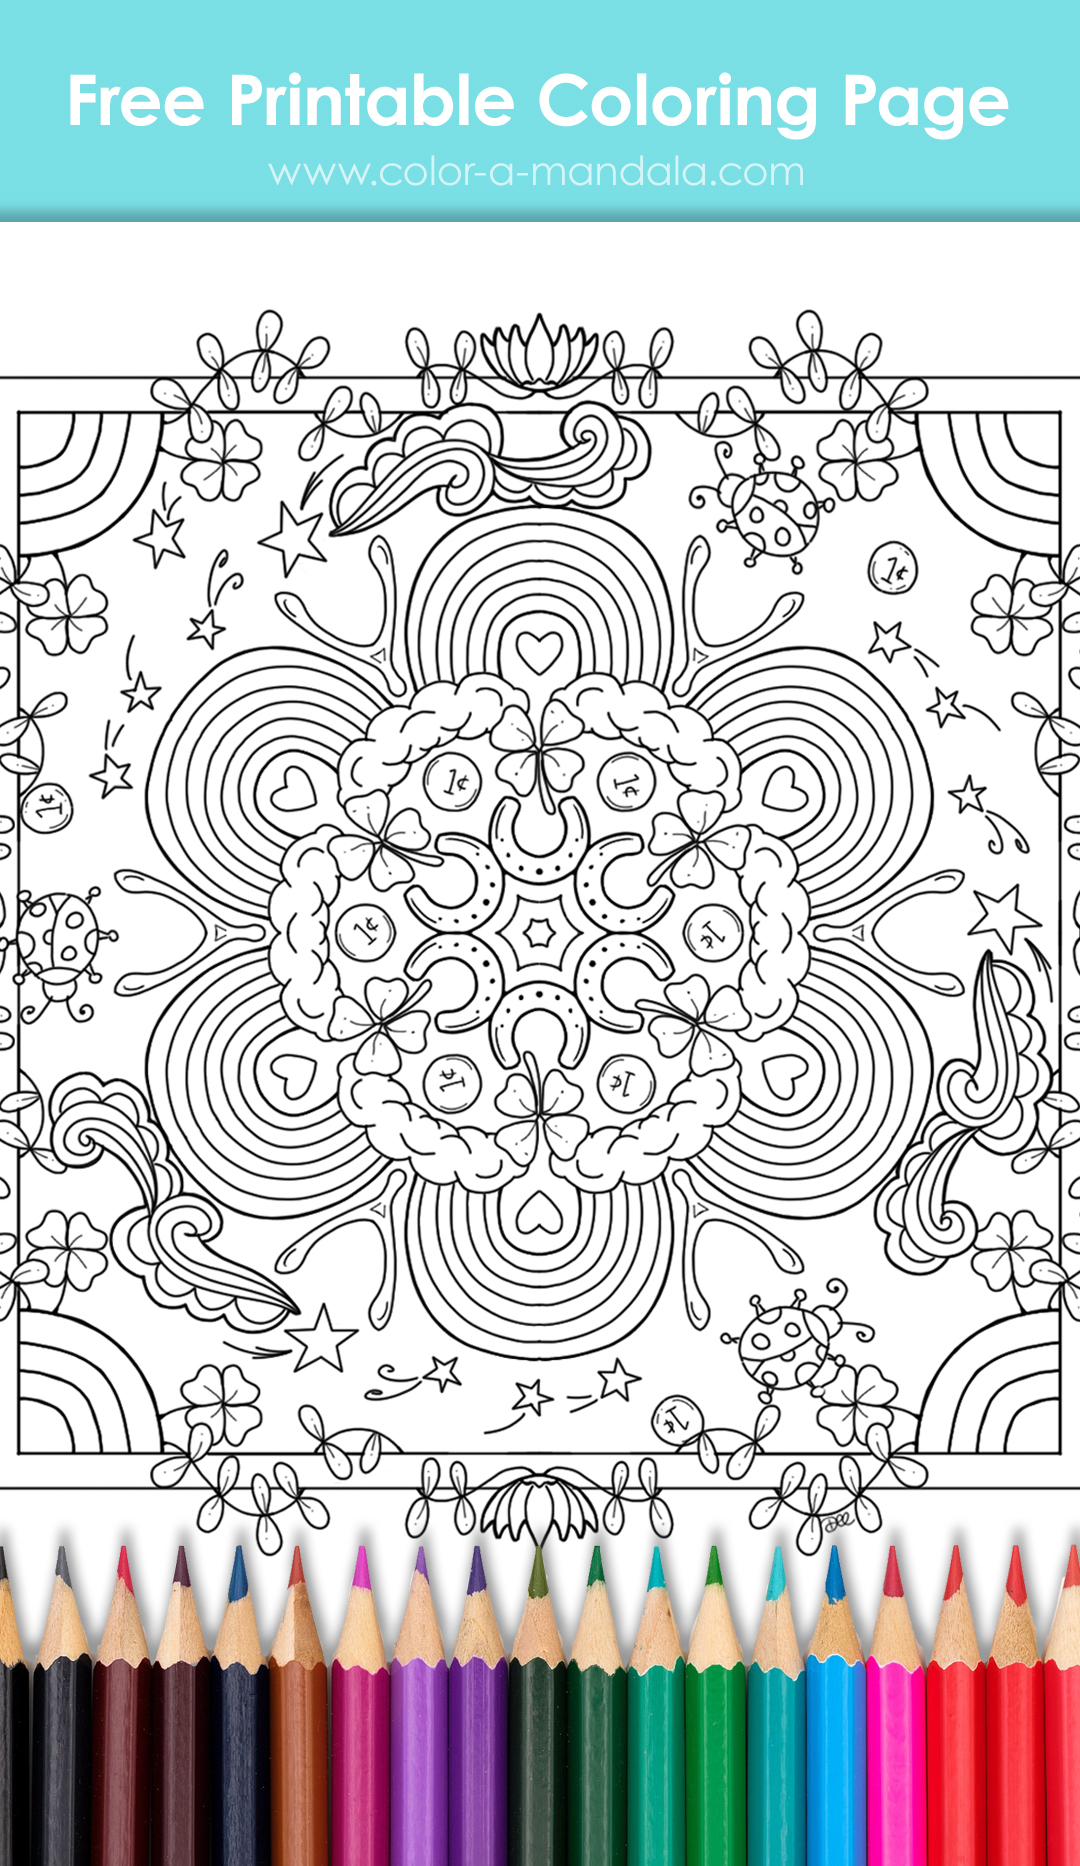 Uncolored good luck coloring page with drawings of rainbows, wishbones, horseshoes, and ladybugs